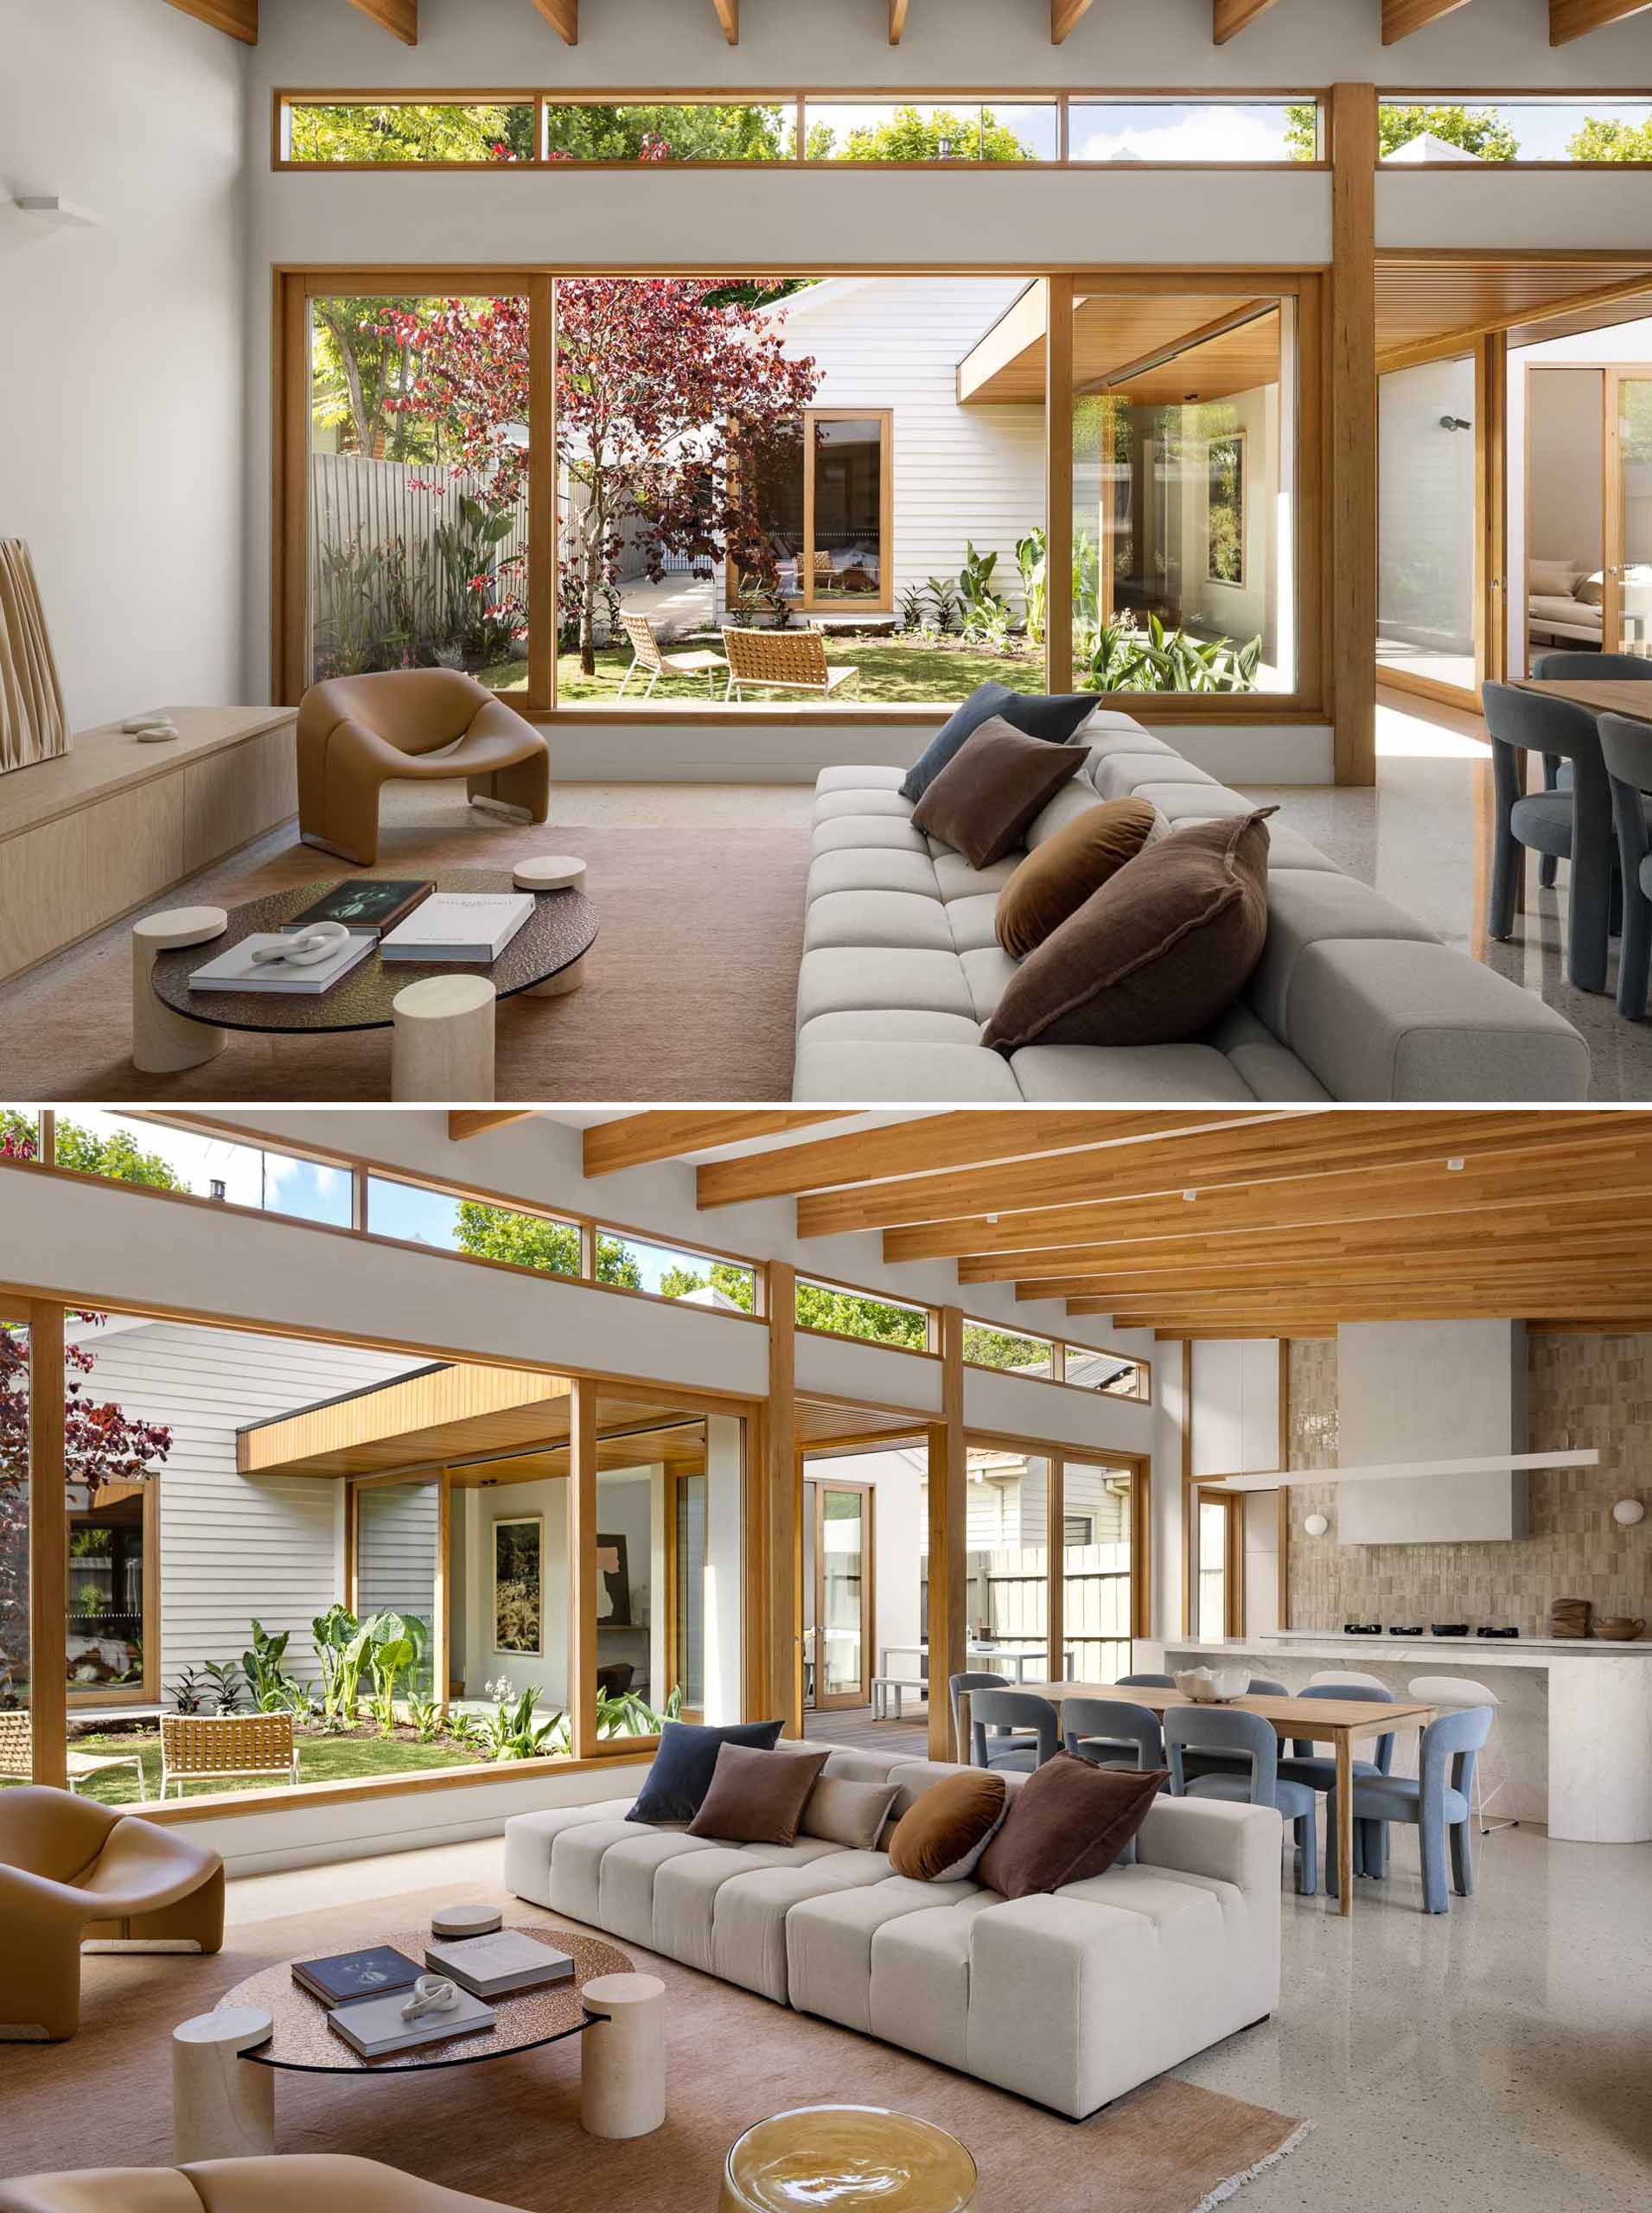 The new extension includes a large open-plan room with a living room at one end. The cathedral ceiling and high-level glazing lifts your eyes over the original dwelling, while the exposed timber beams add to the sense of warmth and detail.